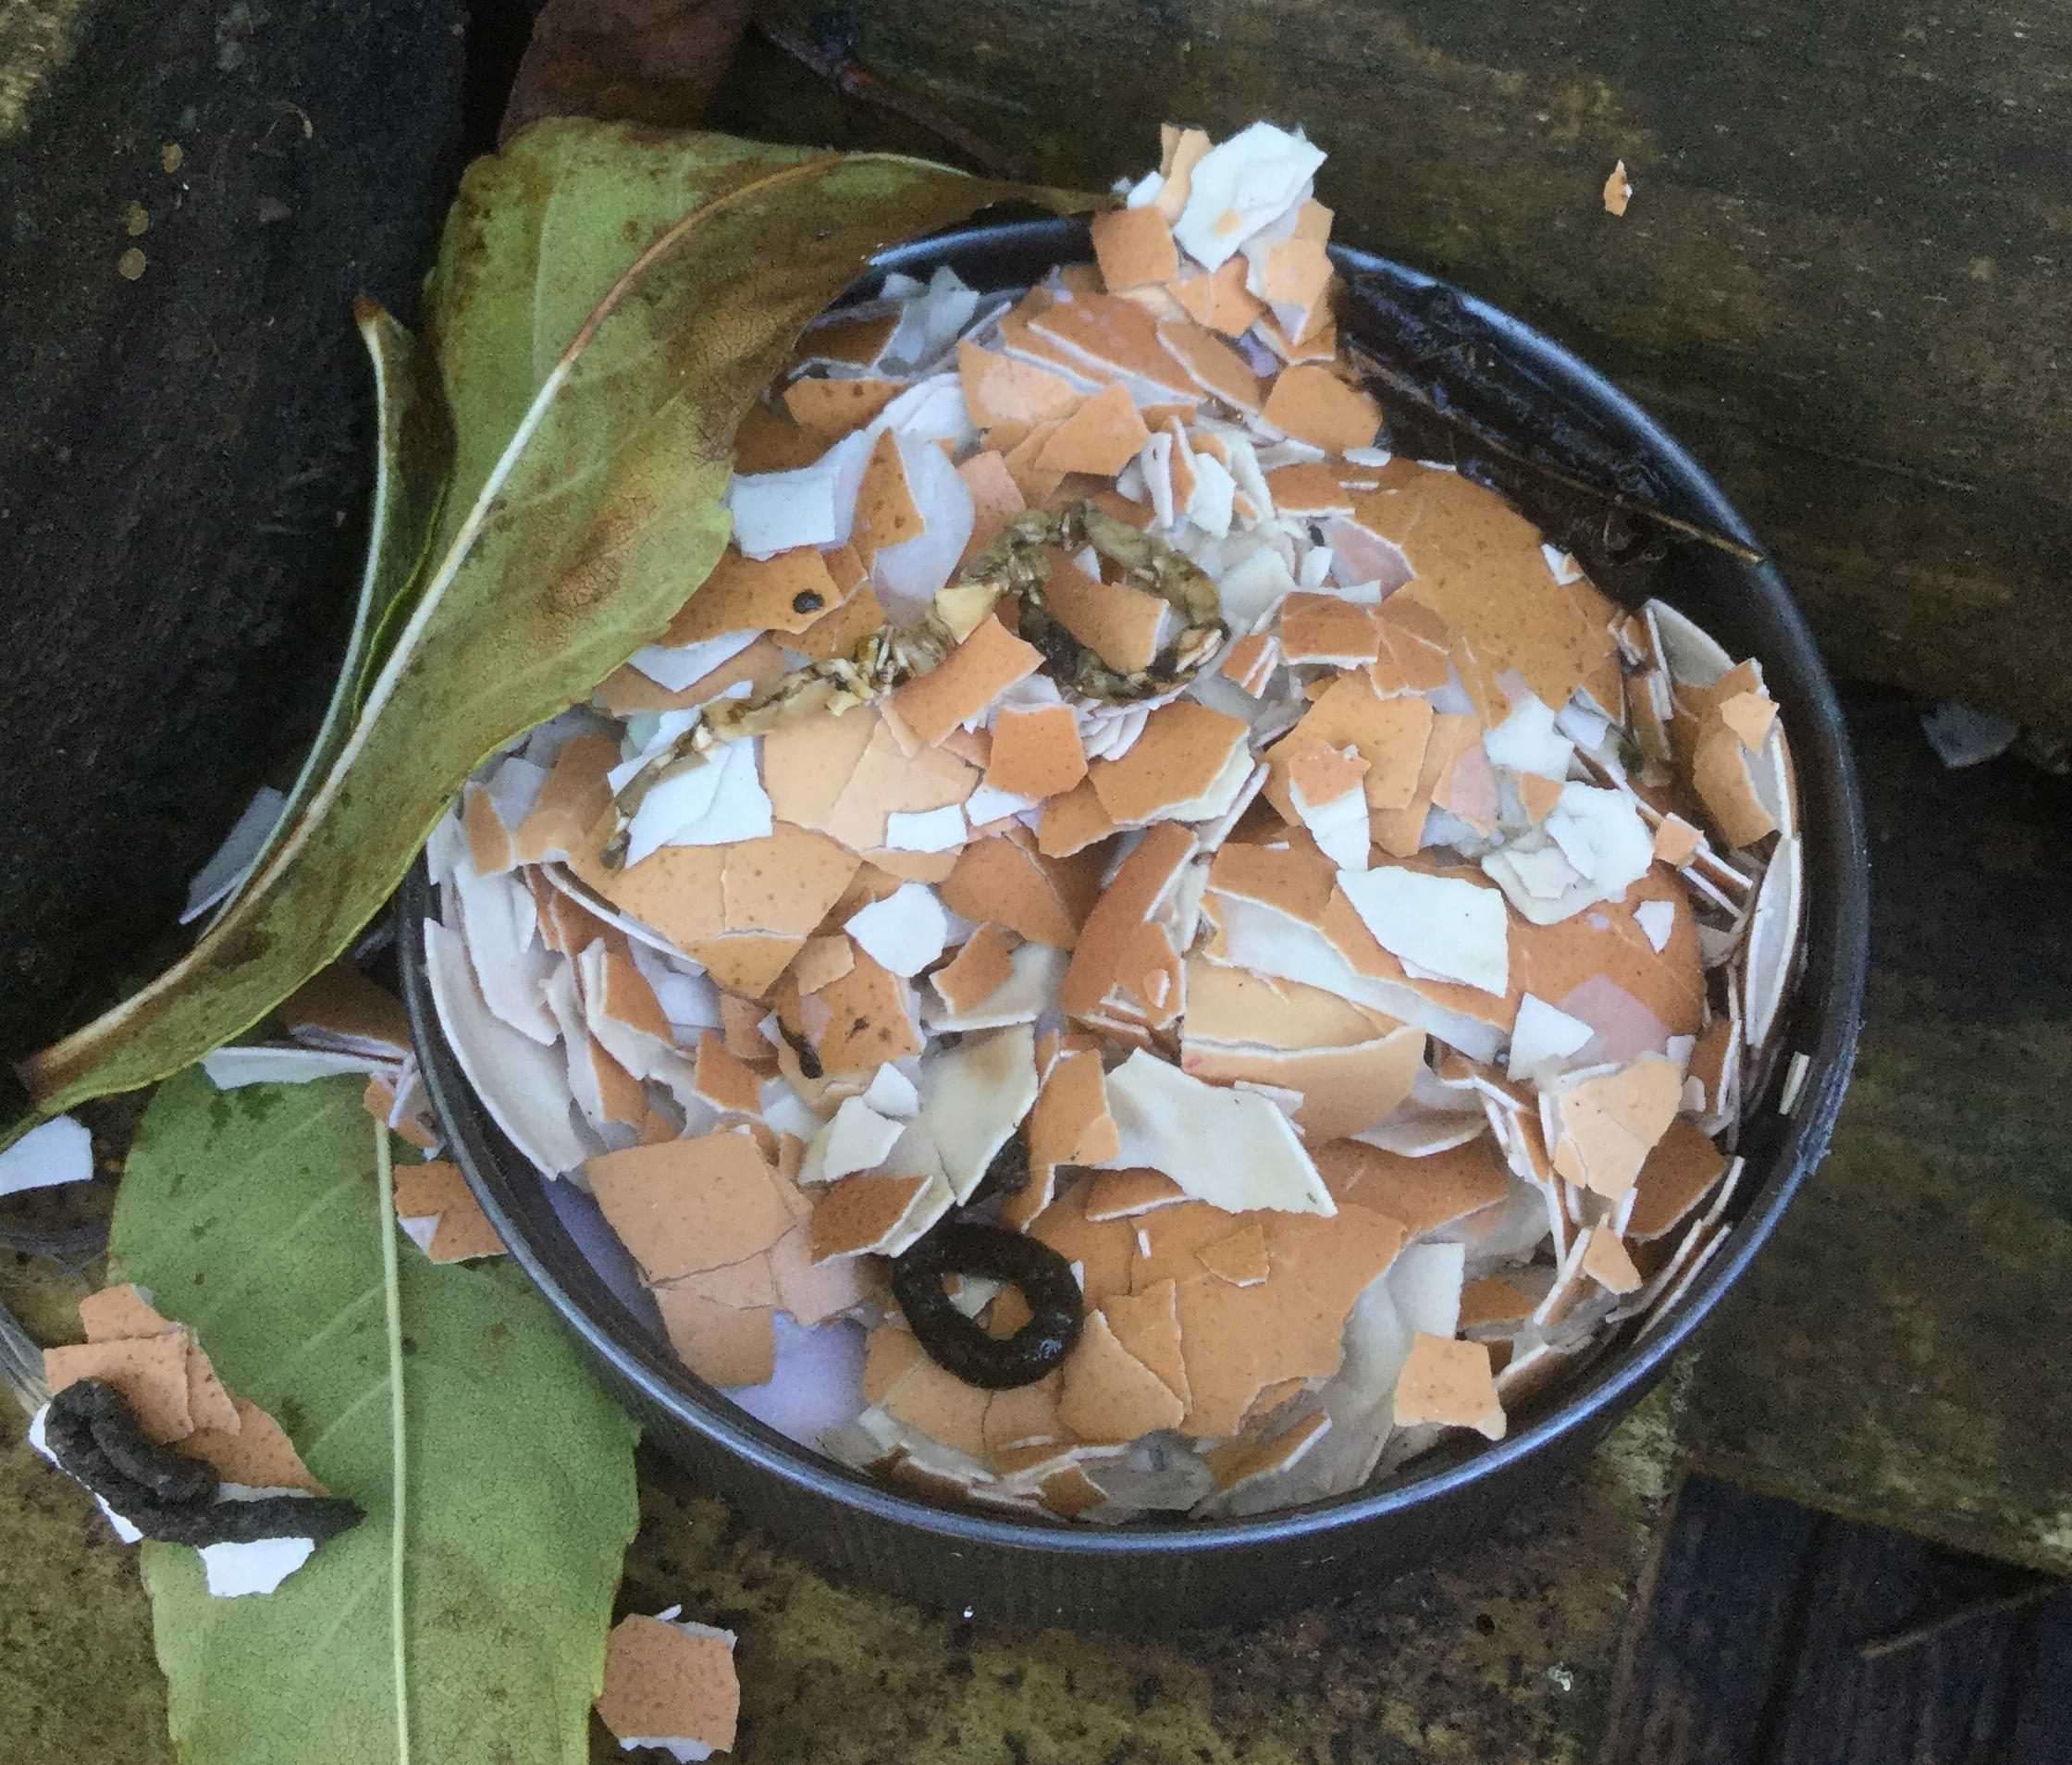 Photo of a small pot full of broken up eggshells. Dark curled snail poo is littered all over the pot and outside of it too.